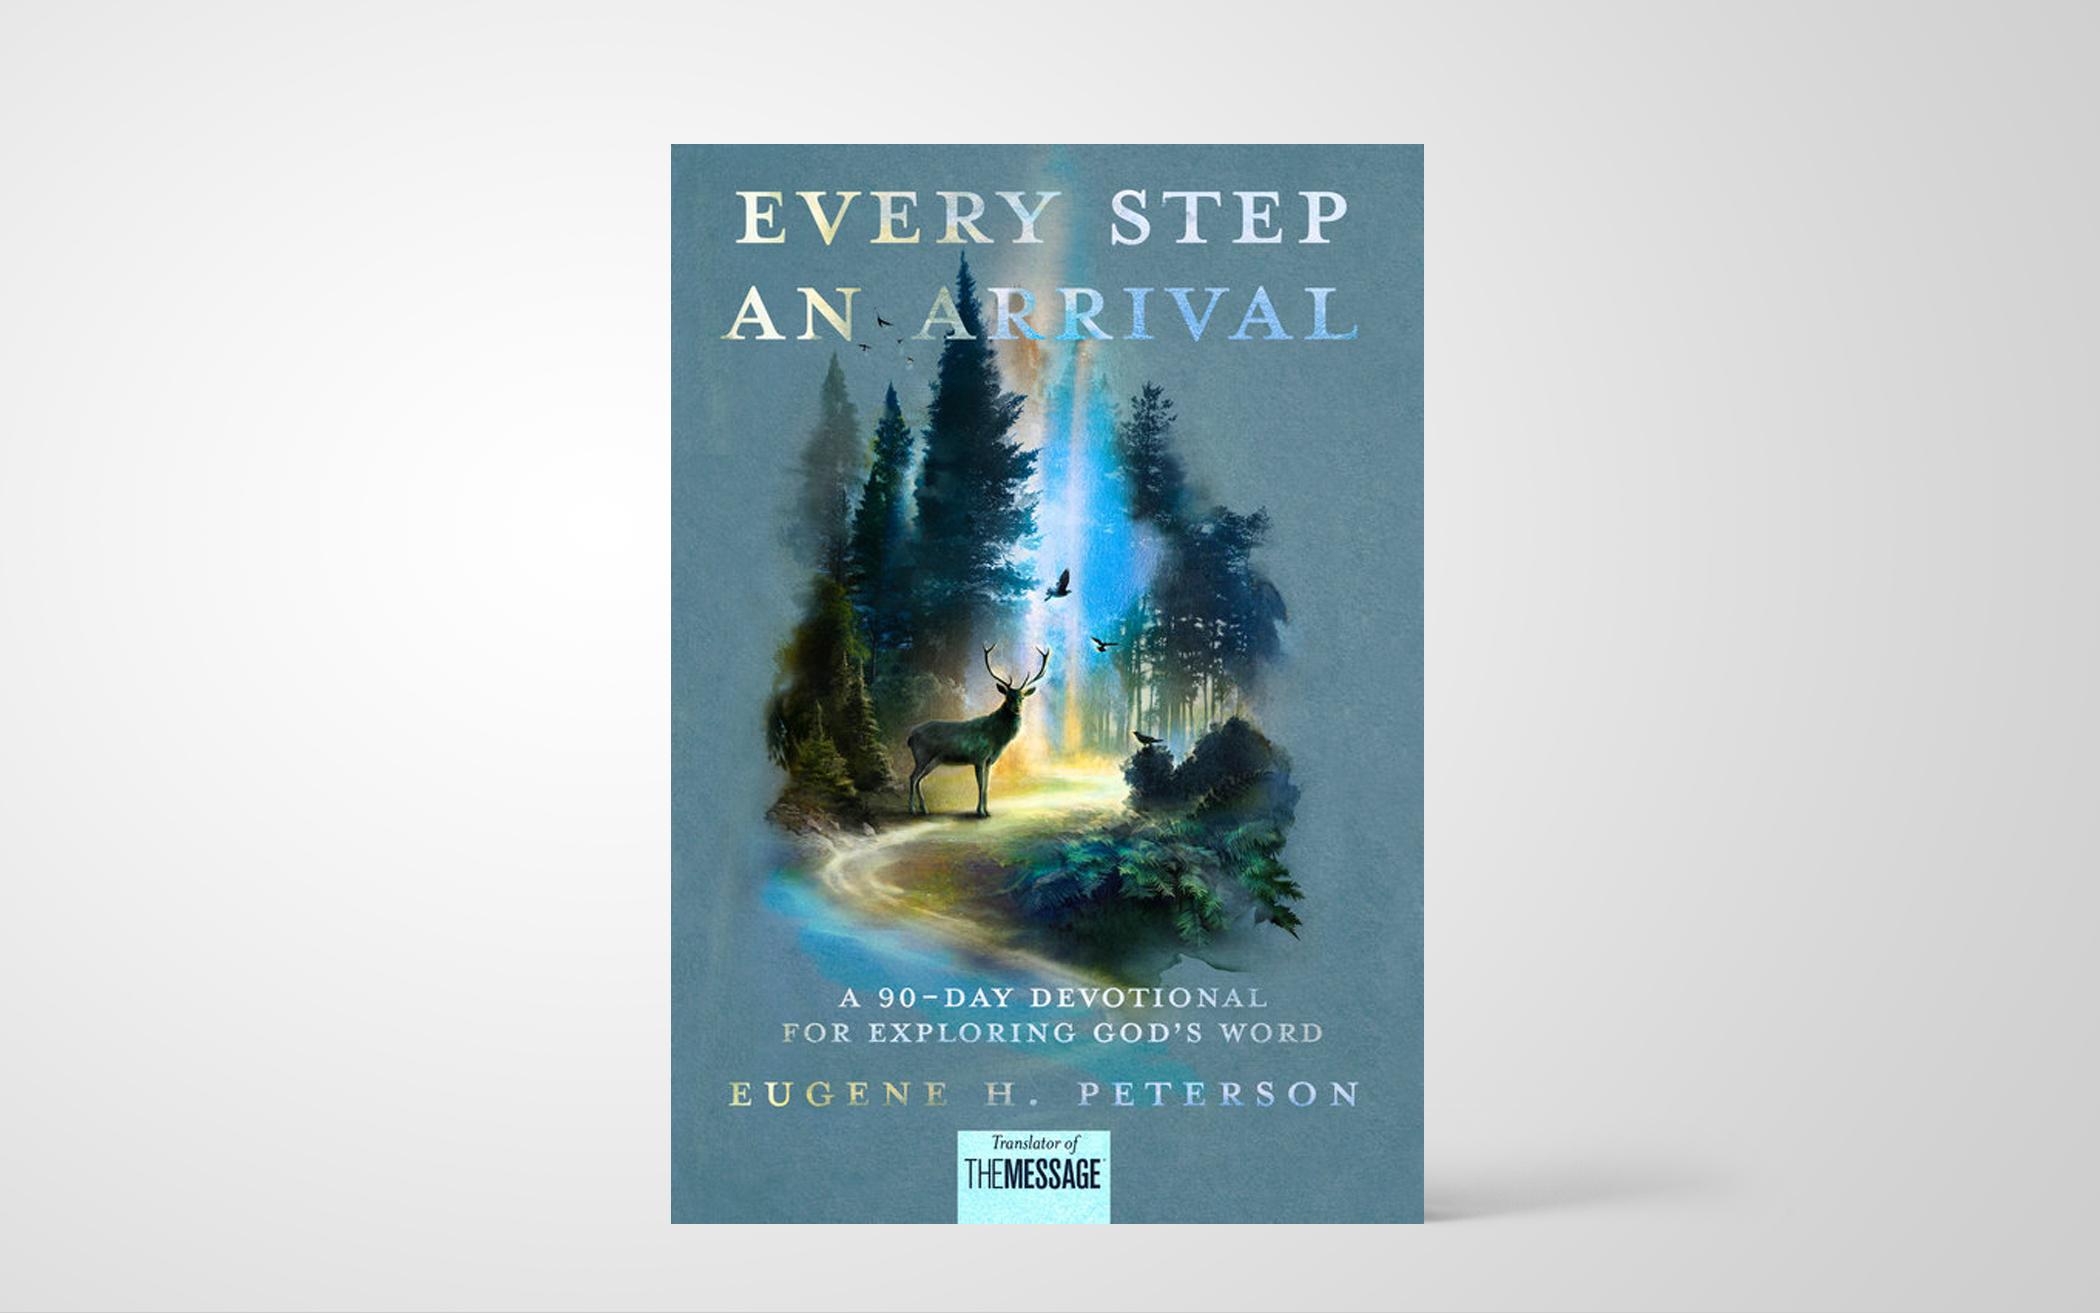 Every Step an Arrival: A 90-Day Devotional for Exploring God's Word 